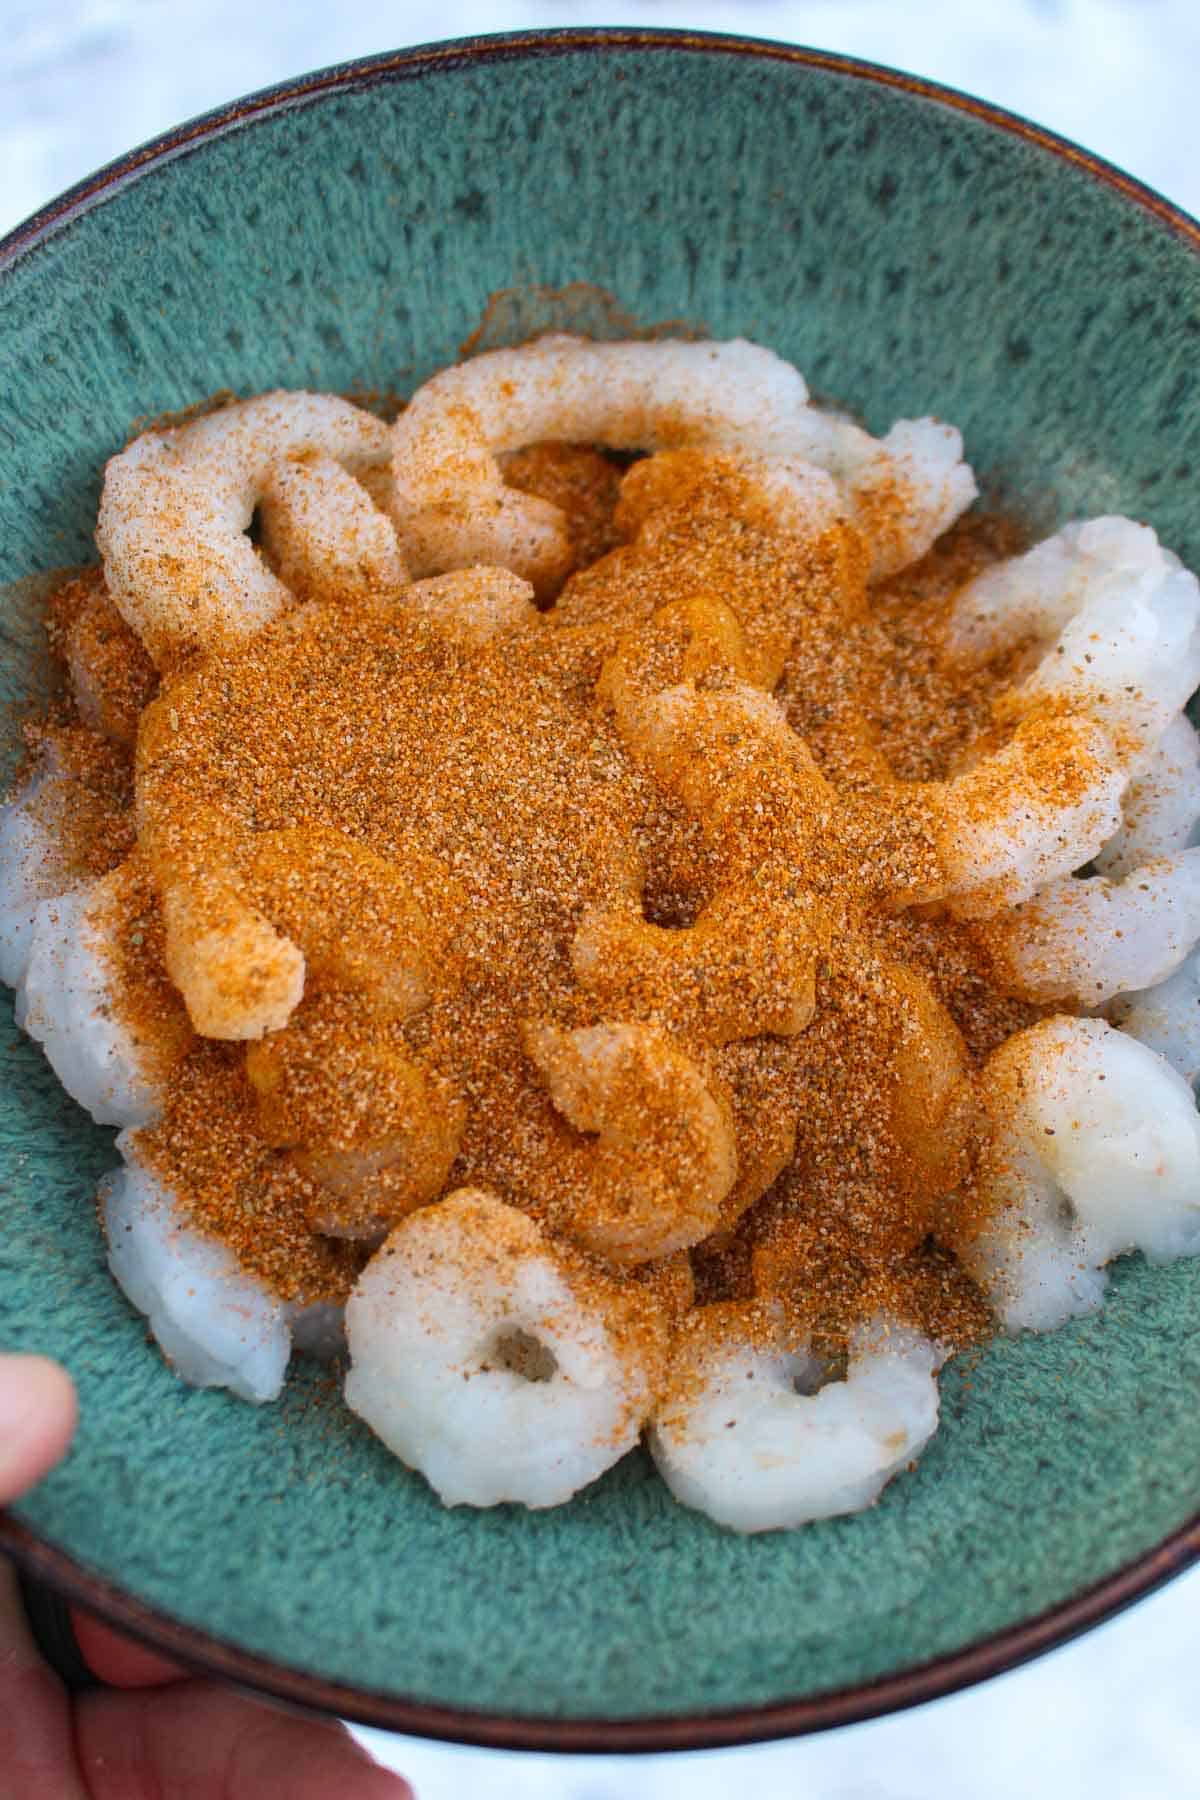 The shrimp are seasoned in a bowl. 